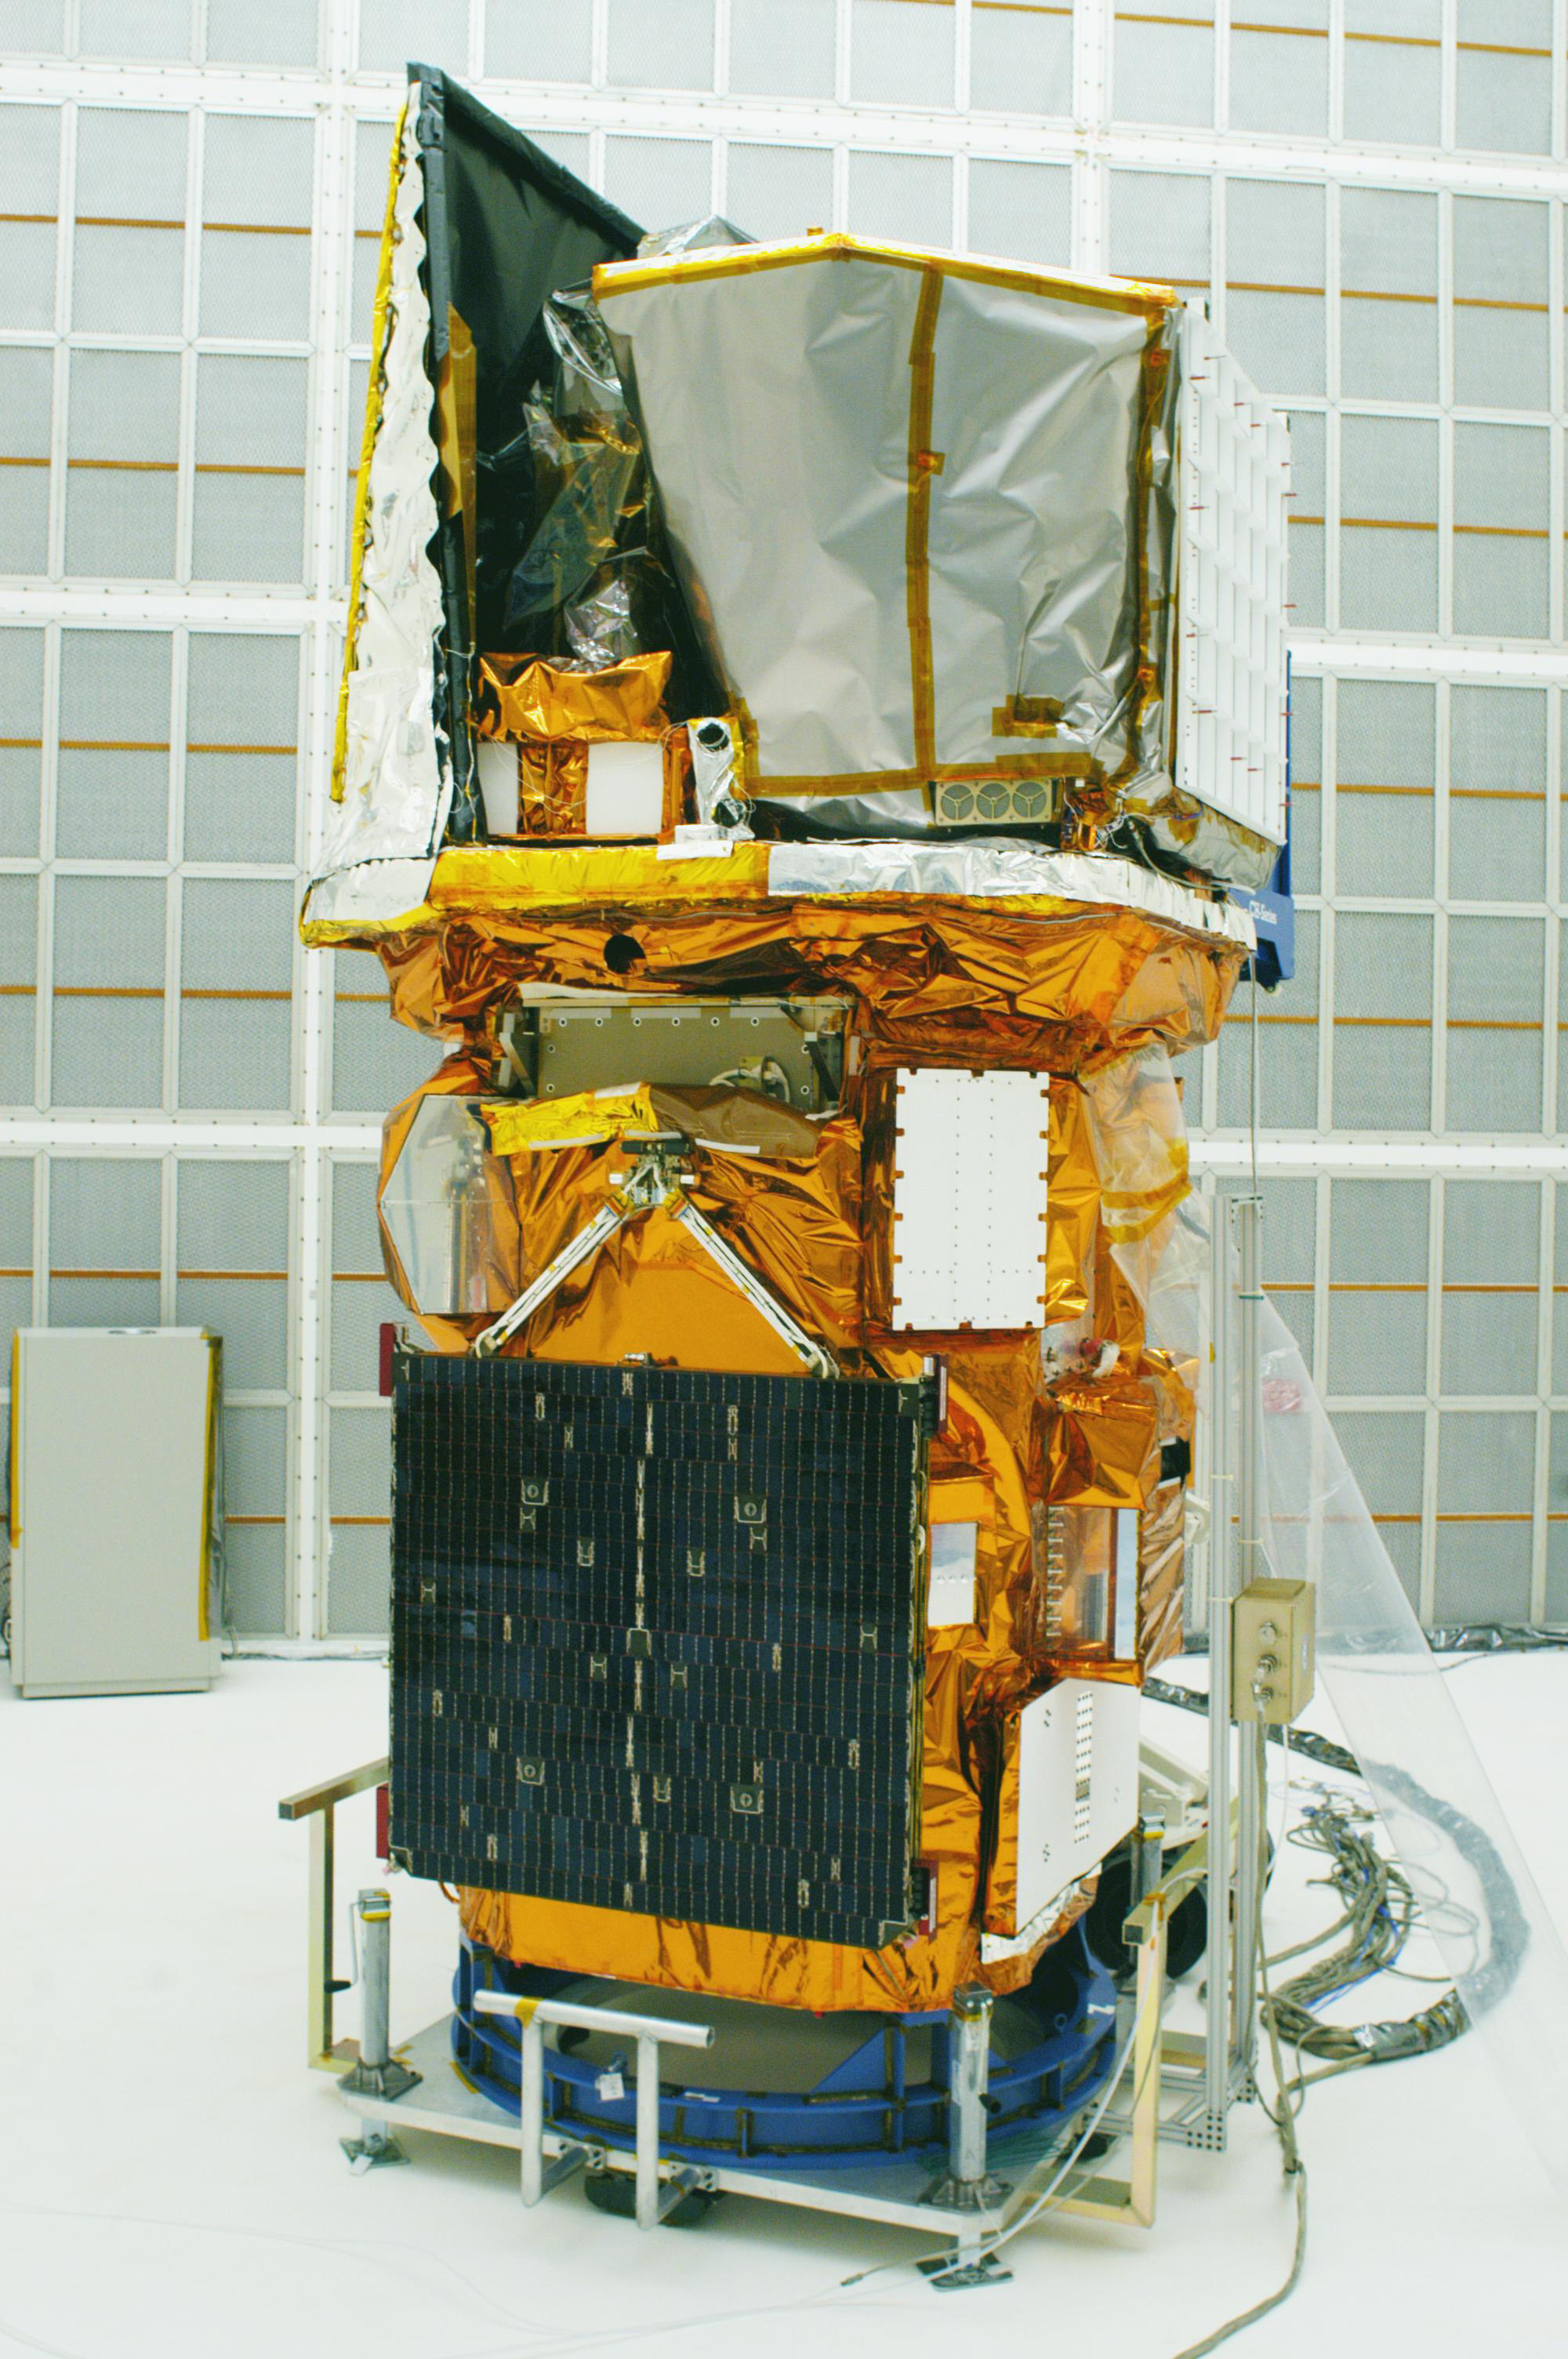 The Swift spacecraft in a hangar before launch.